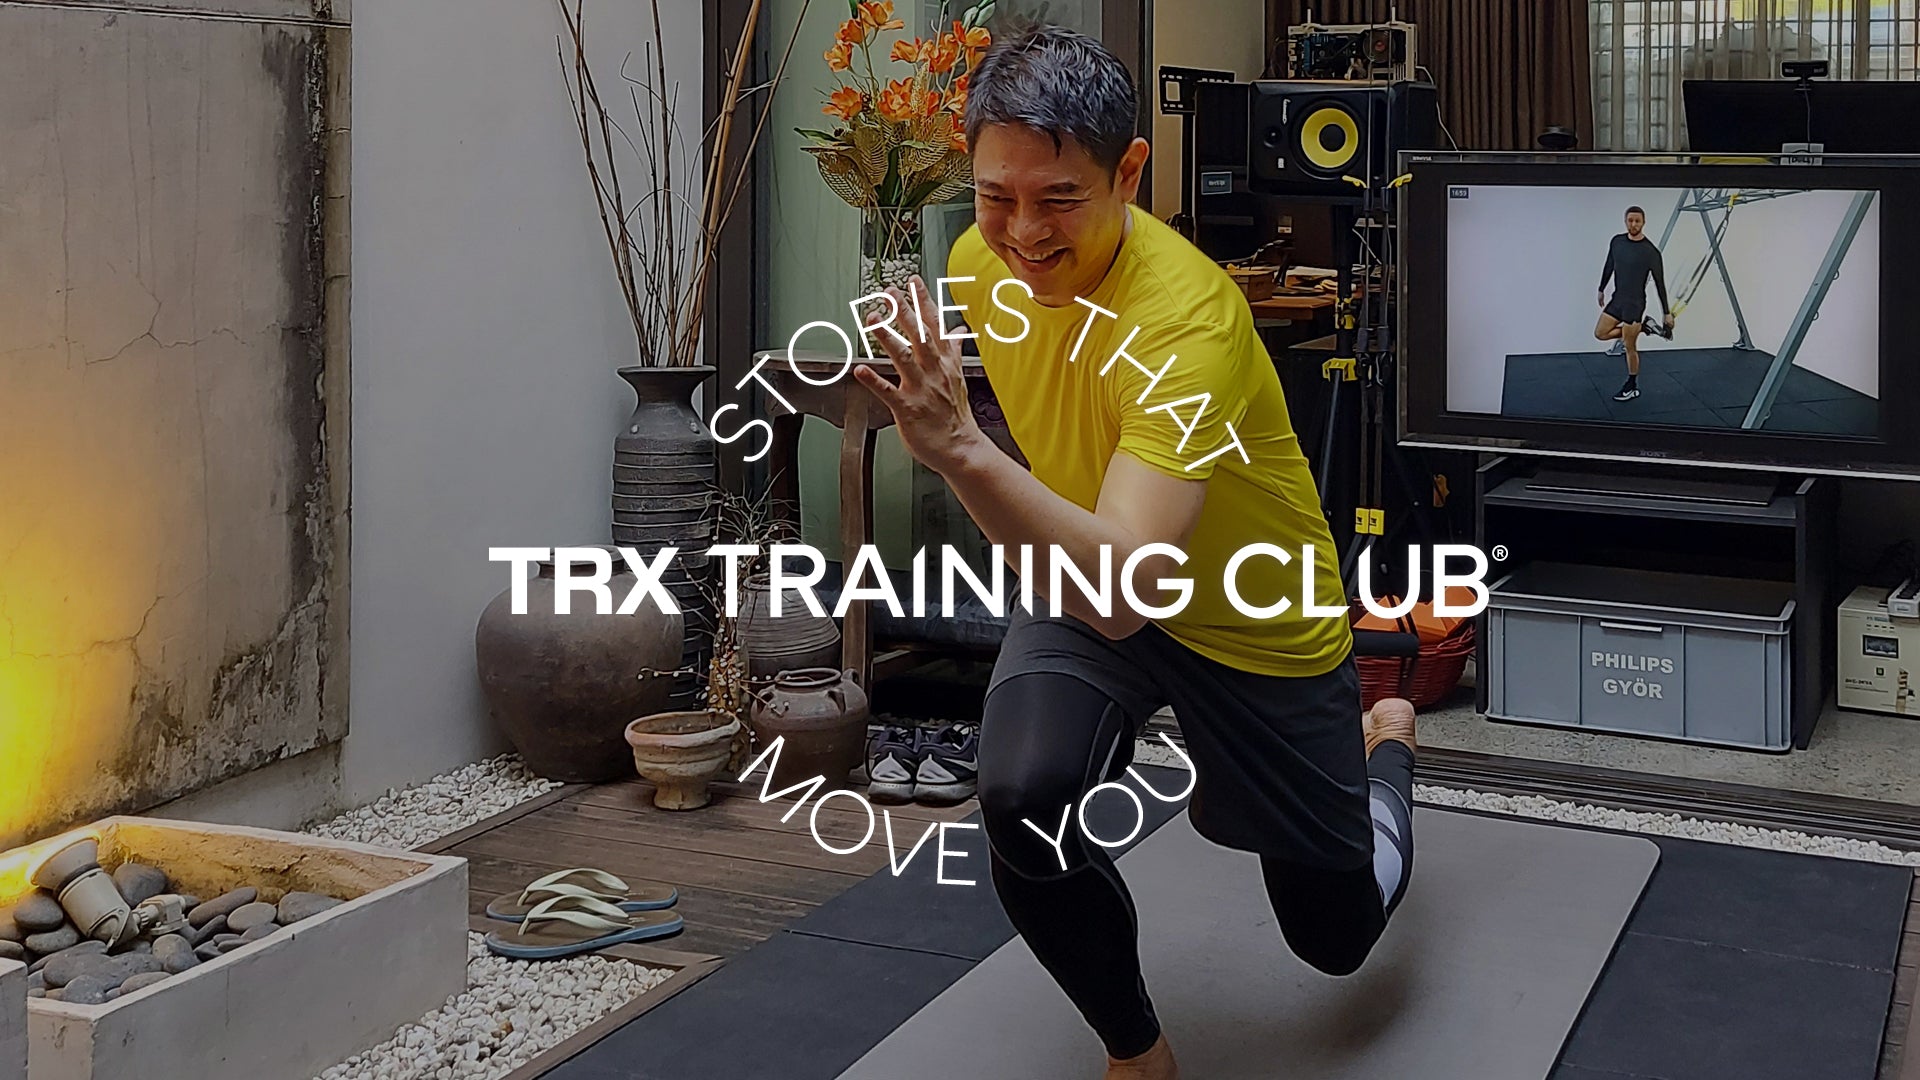 Sancho using his TRX Suspension Trainer at home